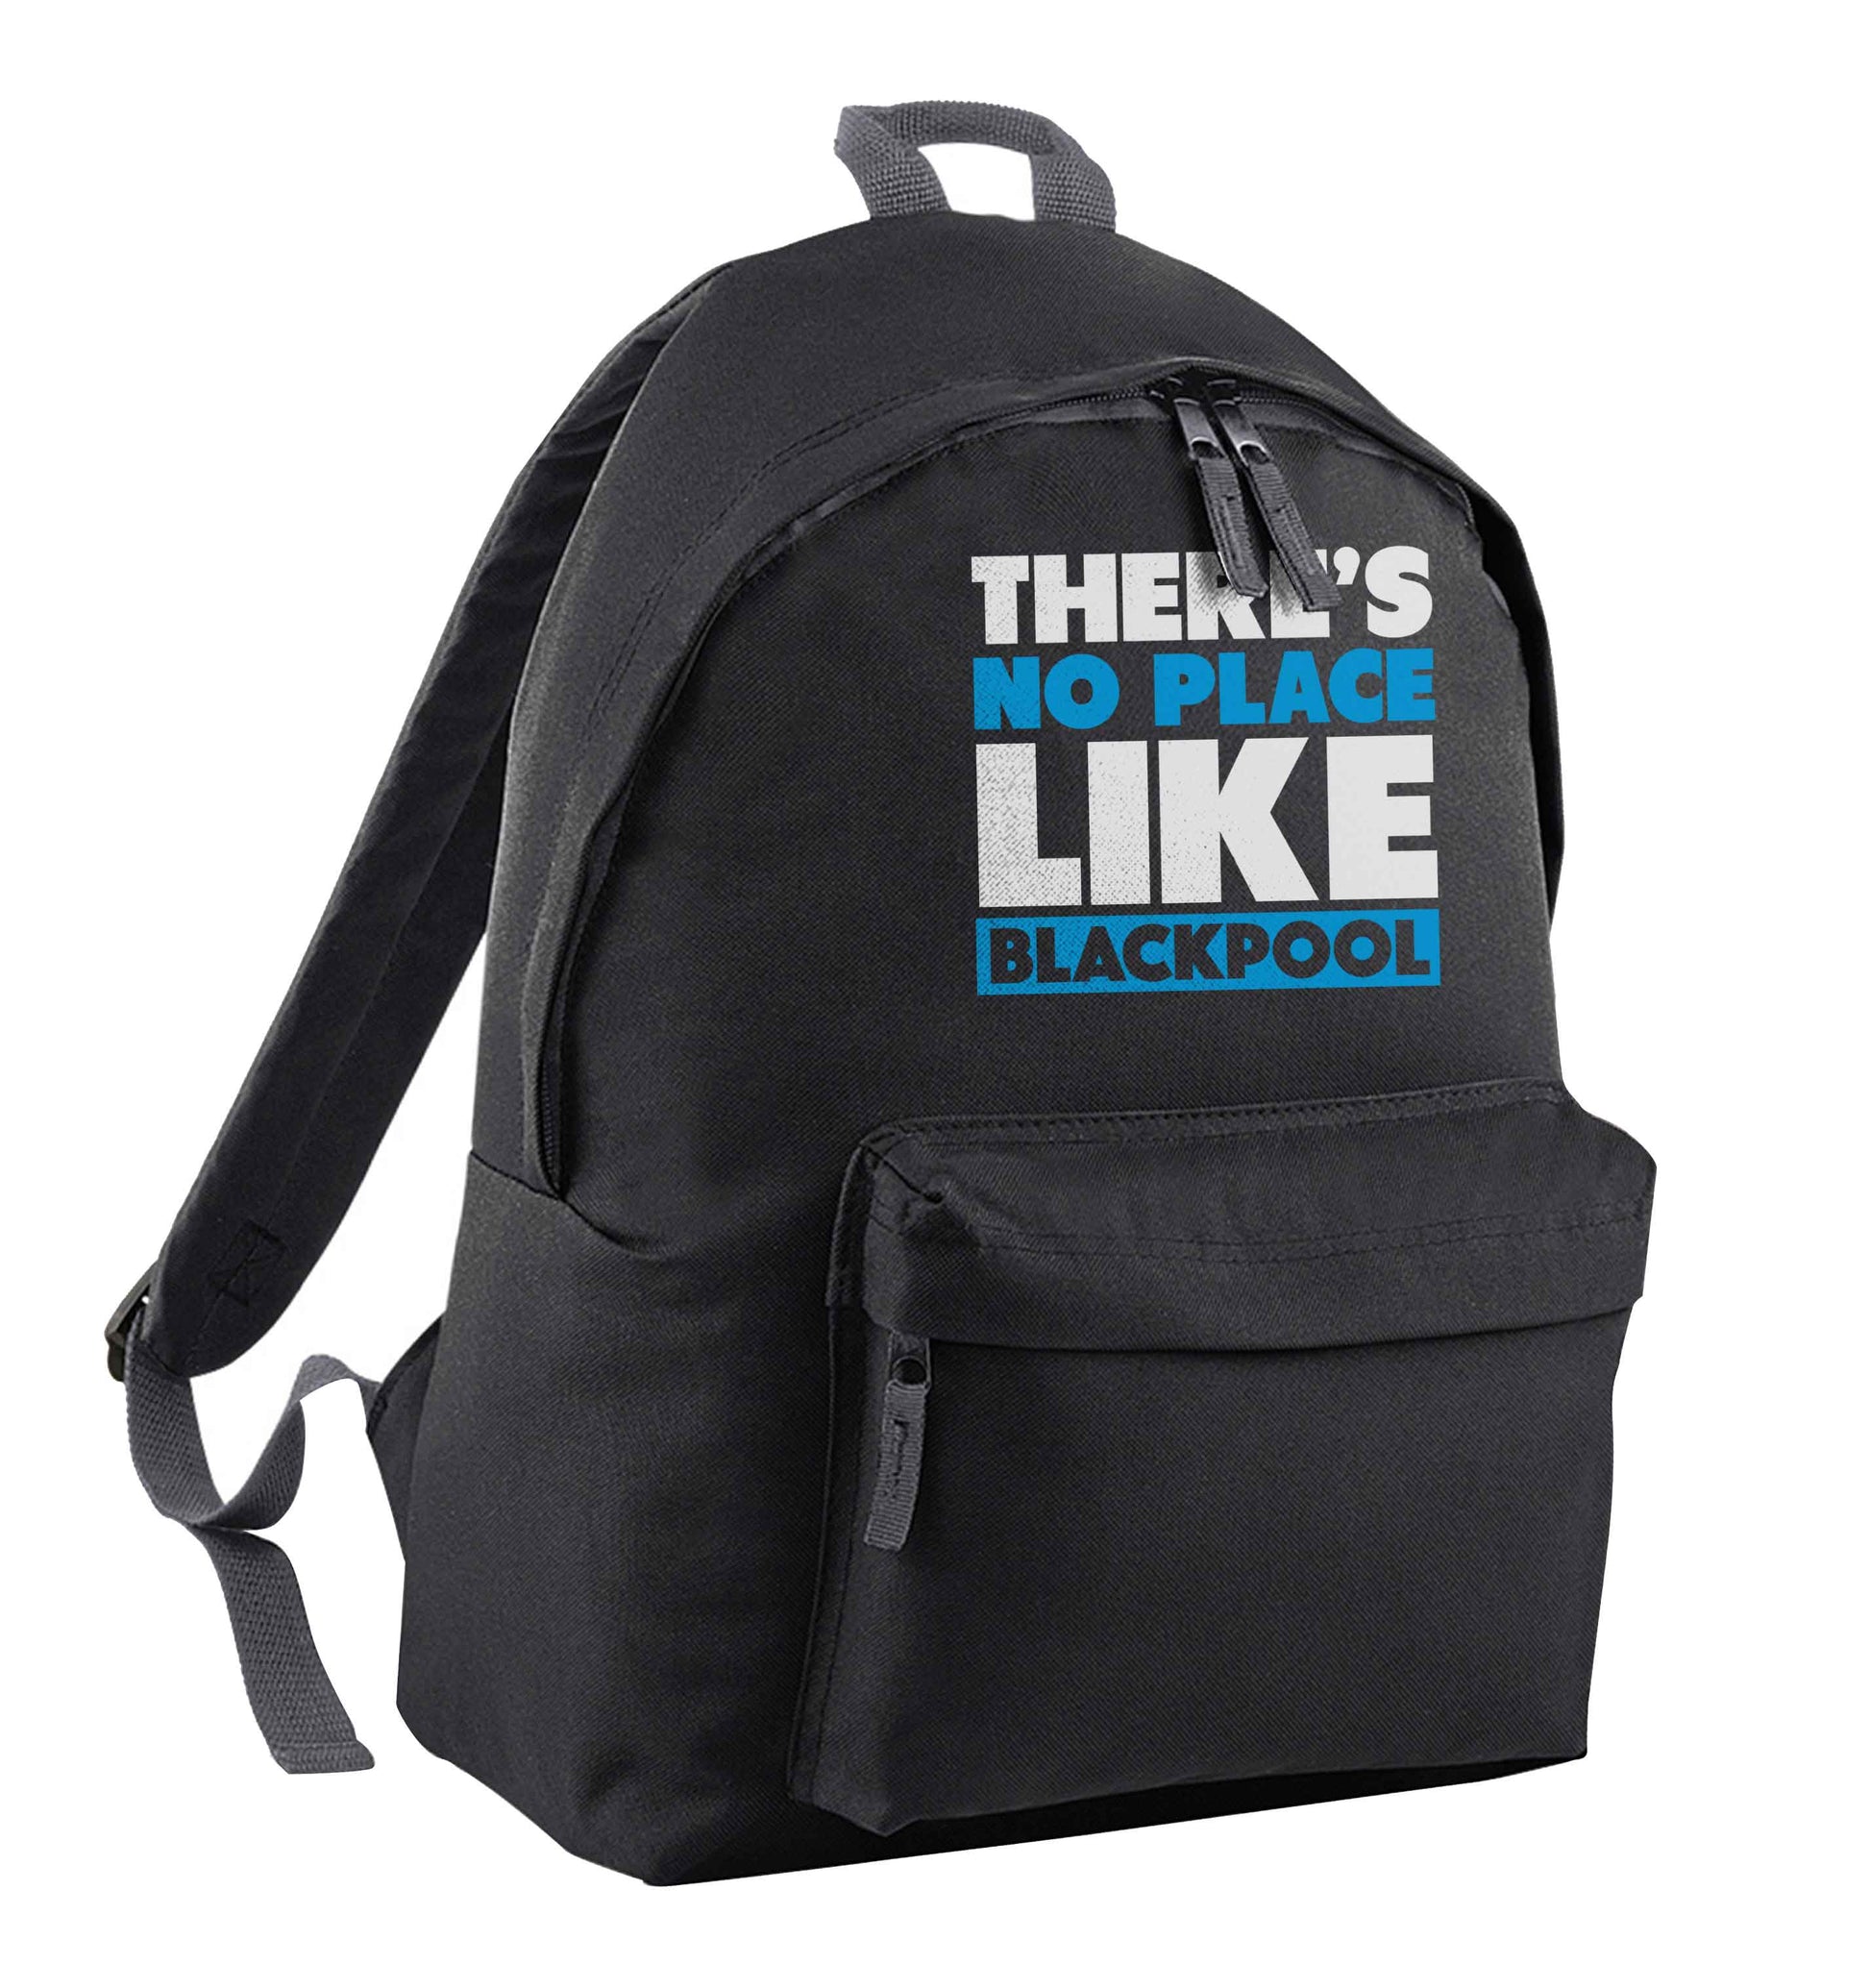 There's no place like Blackpool black children's backpack